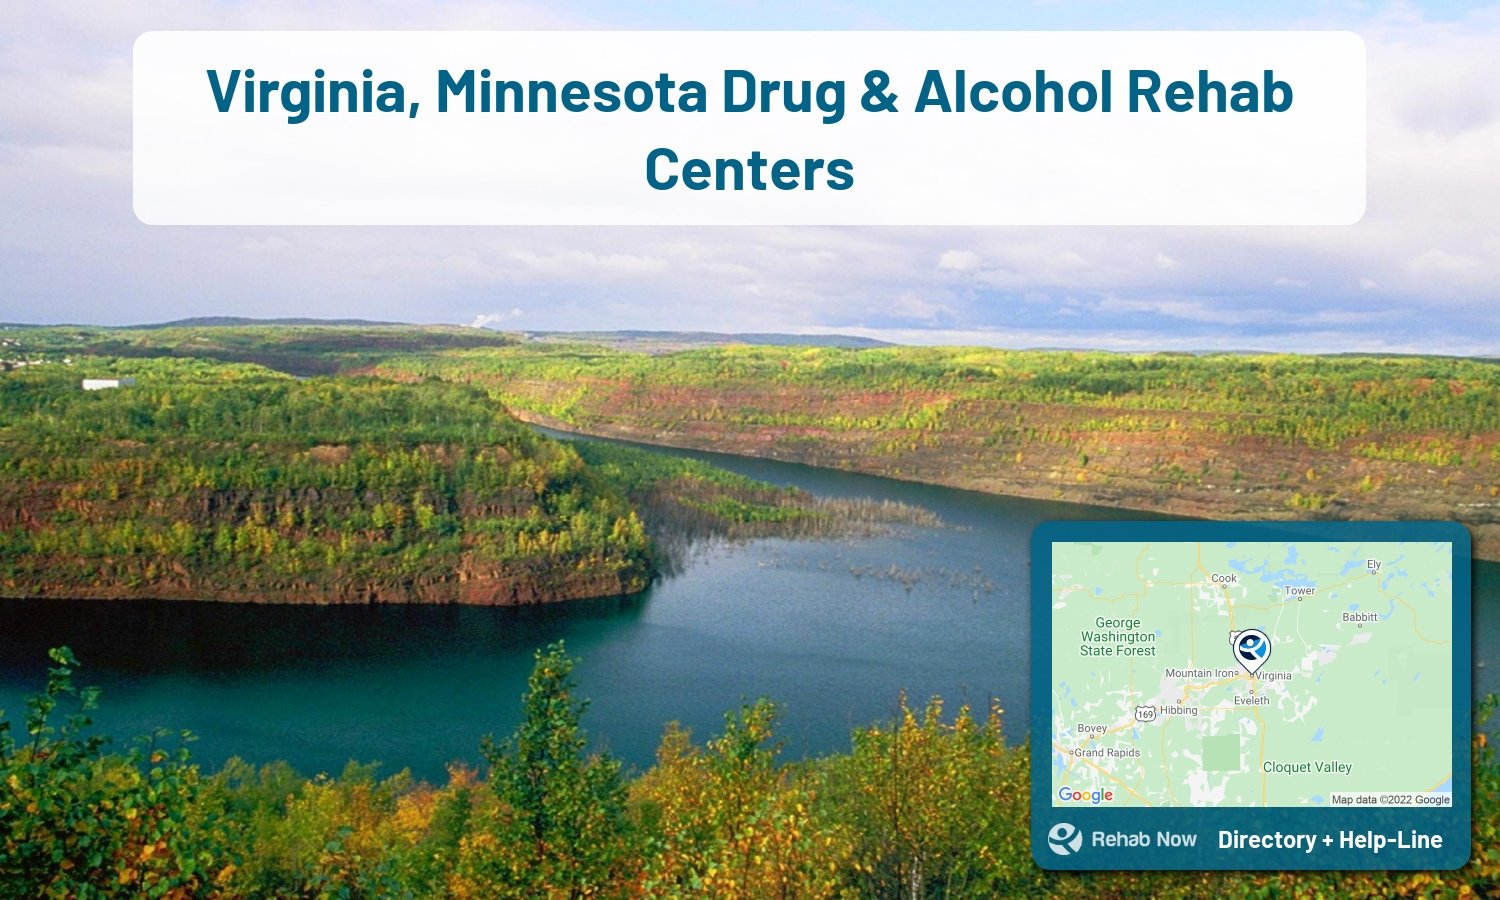 Virginia, MN Treatment Centers. Find drug rehab in Virginia, Minnesota, or detox and treatment programs. Get the right help now!